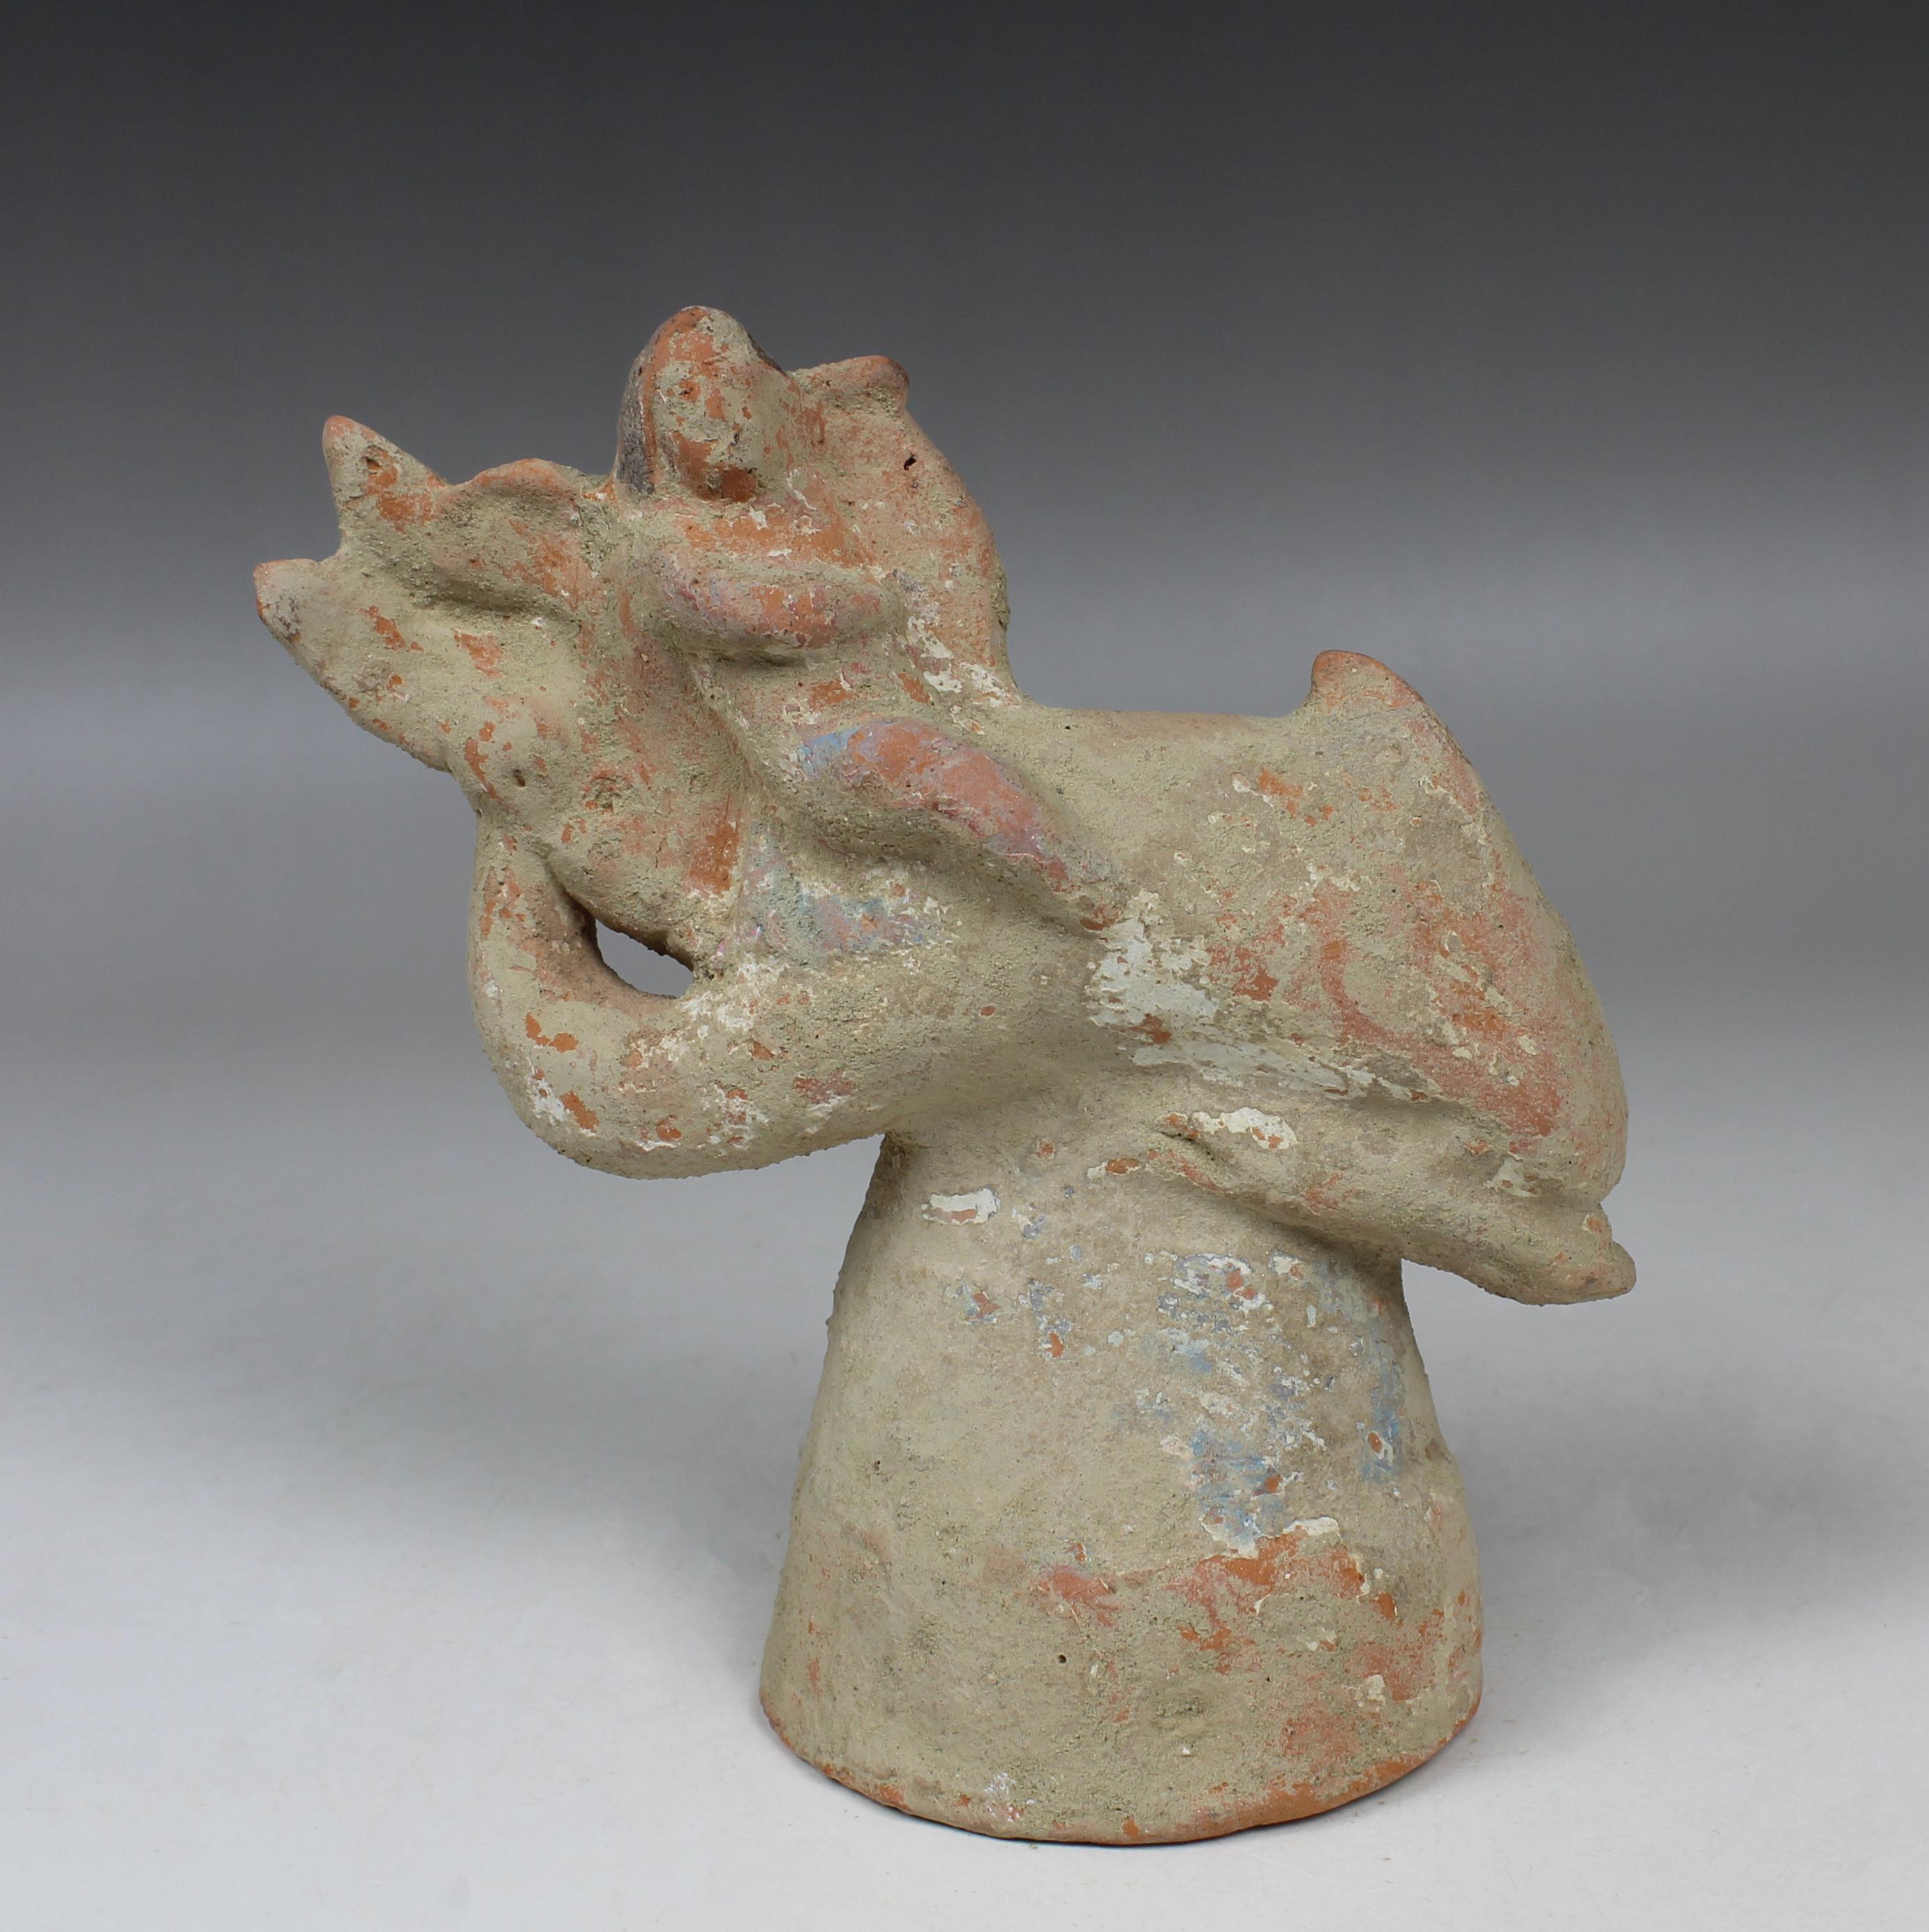 ITEM: Figurine of a little Eros riding on a dolphin, holding a lyre with remains of polychromy
MATERIAL: Pottery
CULTURE: Greek
PERIOD: 4th – 3rd Century B.C
DIMENSIONS: 145 mm x 140 mm x 65 mm
CONDITION: Good condition
PROVENANCE: Ex American